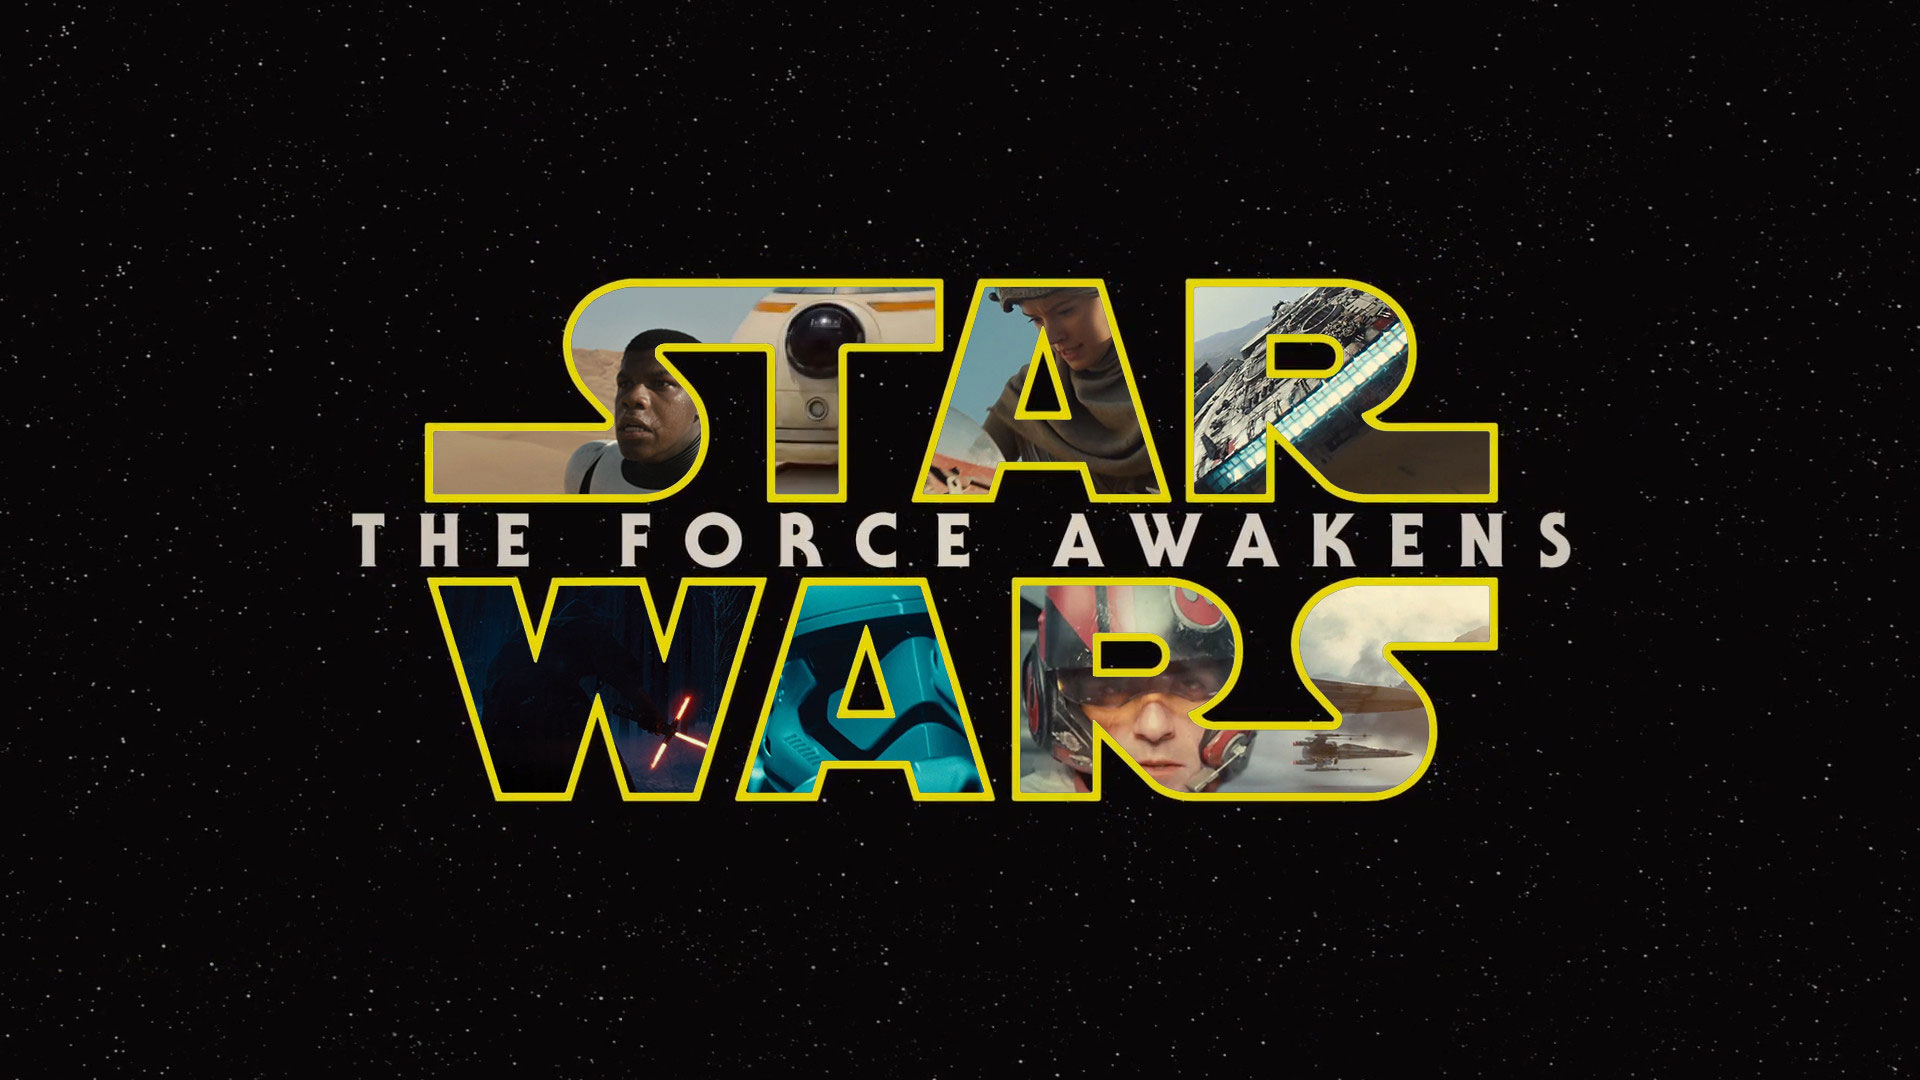 1920x1080 Get ready for the Force Awakens with these 26 Star Wars wallpapers